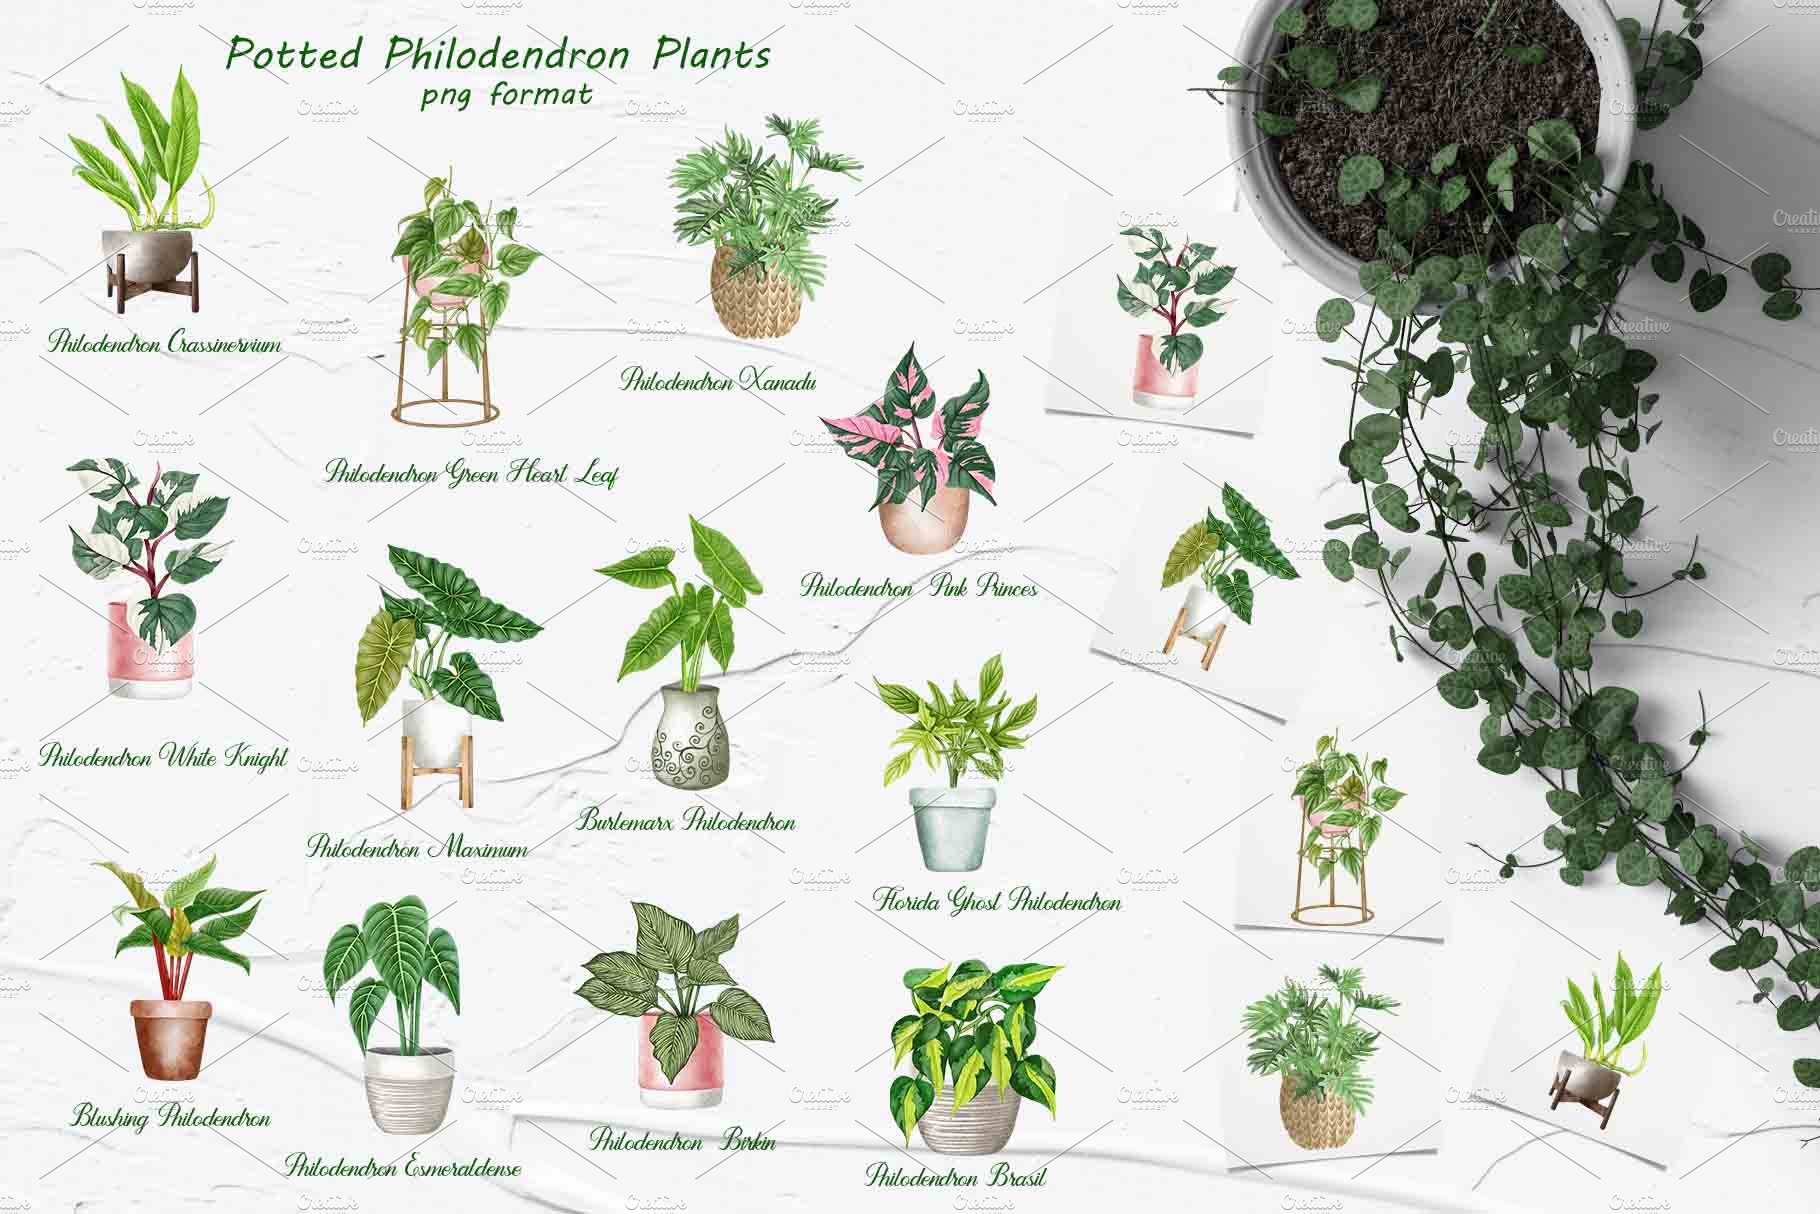 Potted philodendron plants collection.